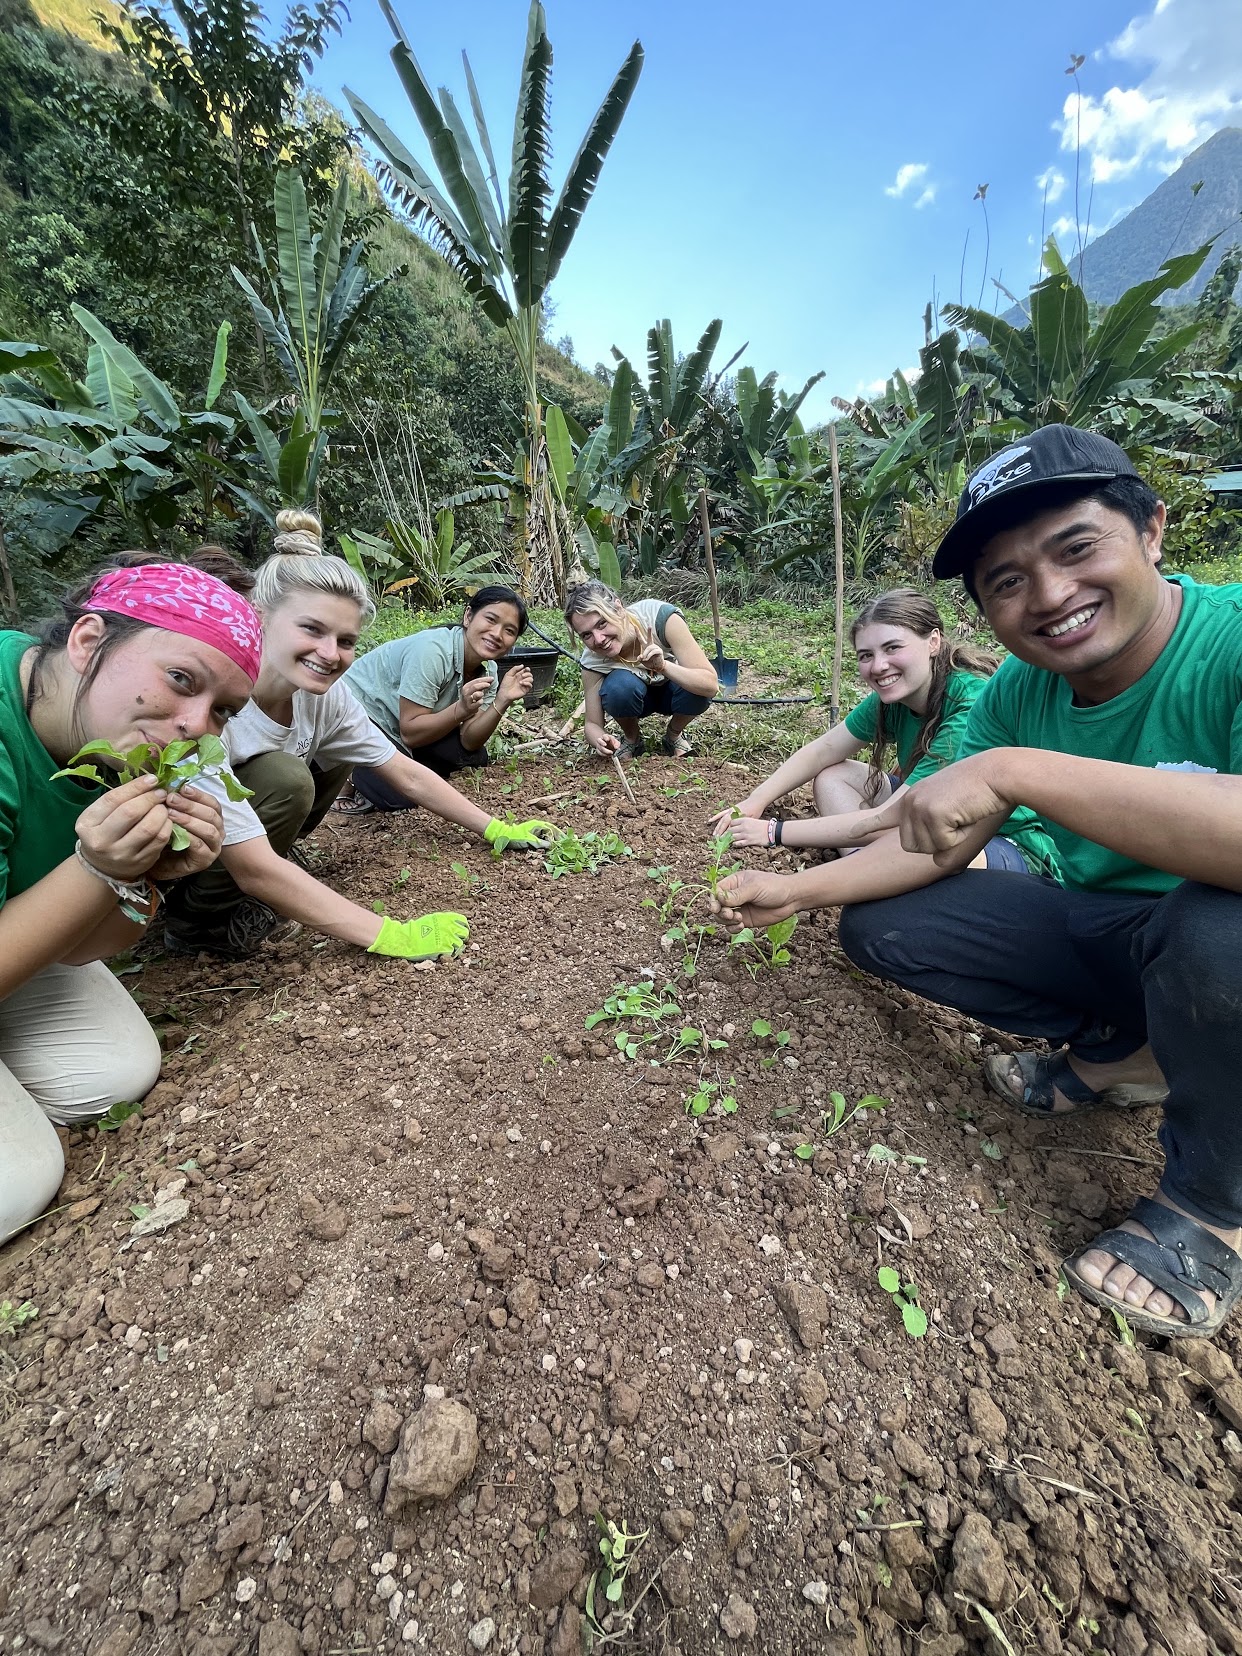 Planting food with awesome people